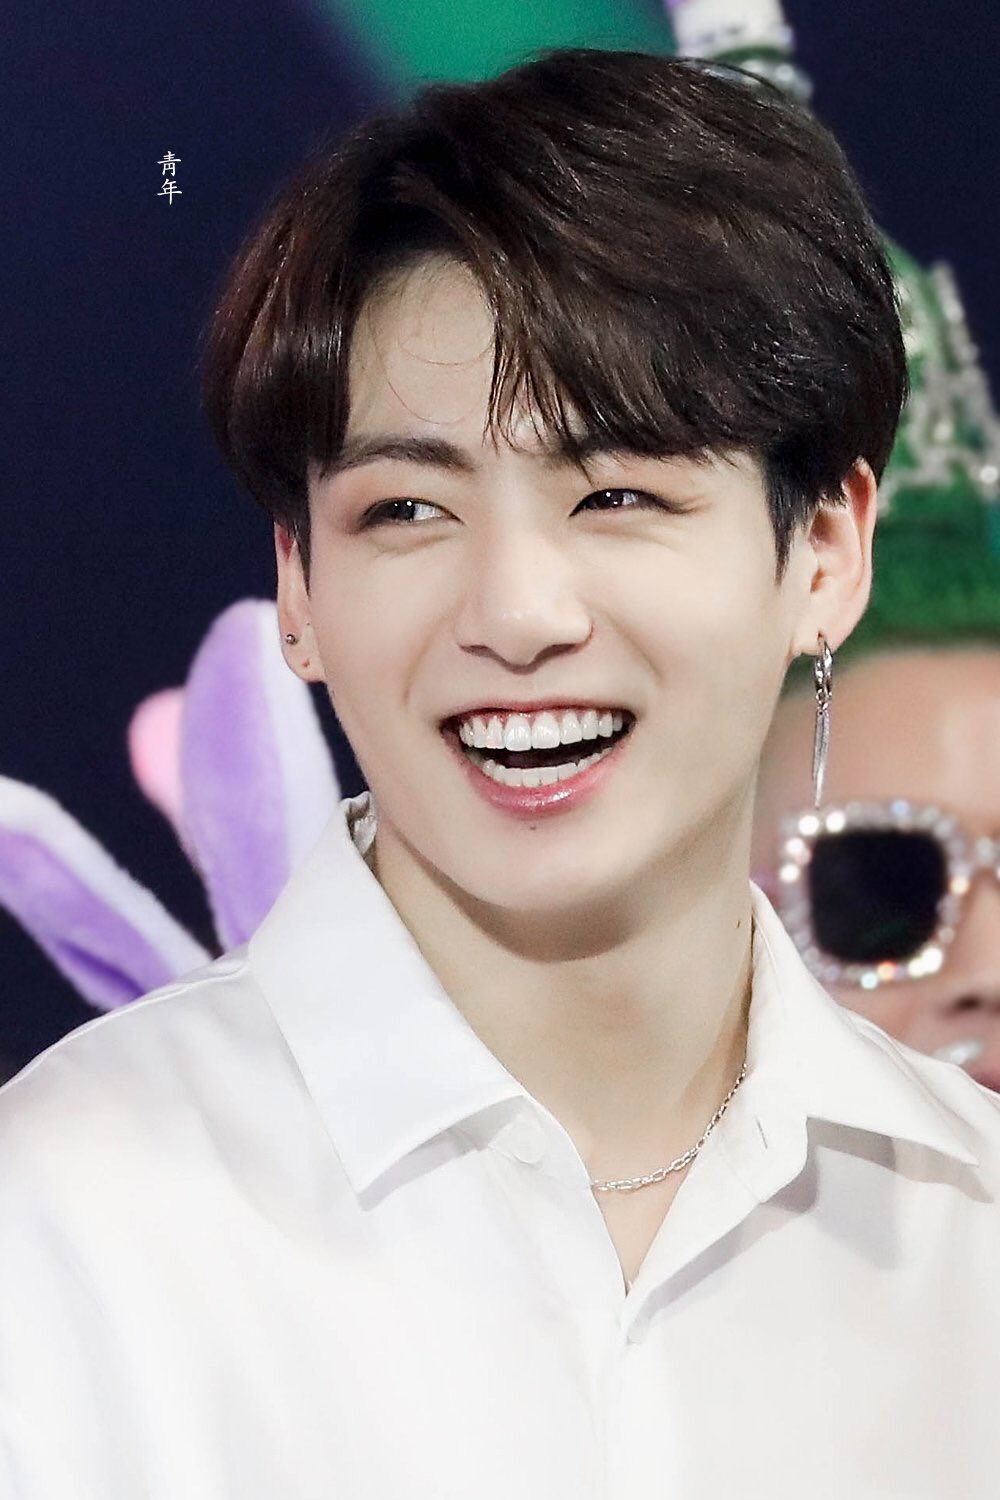 jungkook pics 🐰☁️ on Twitter: "This smile is so beautiful ...